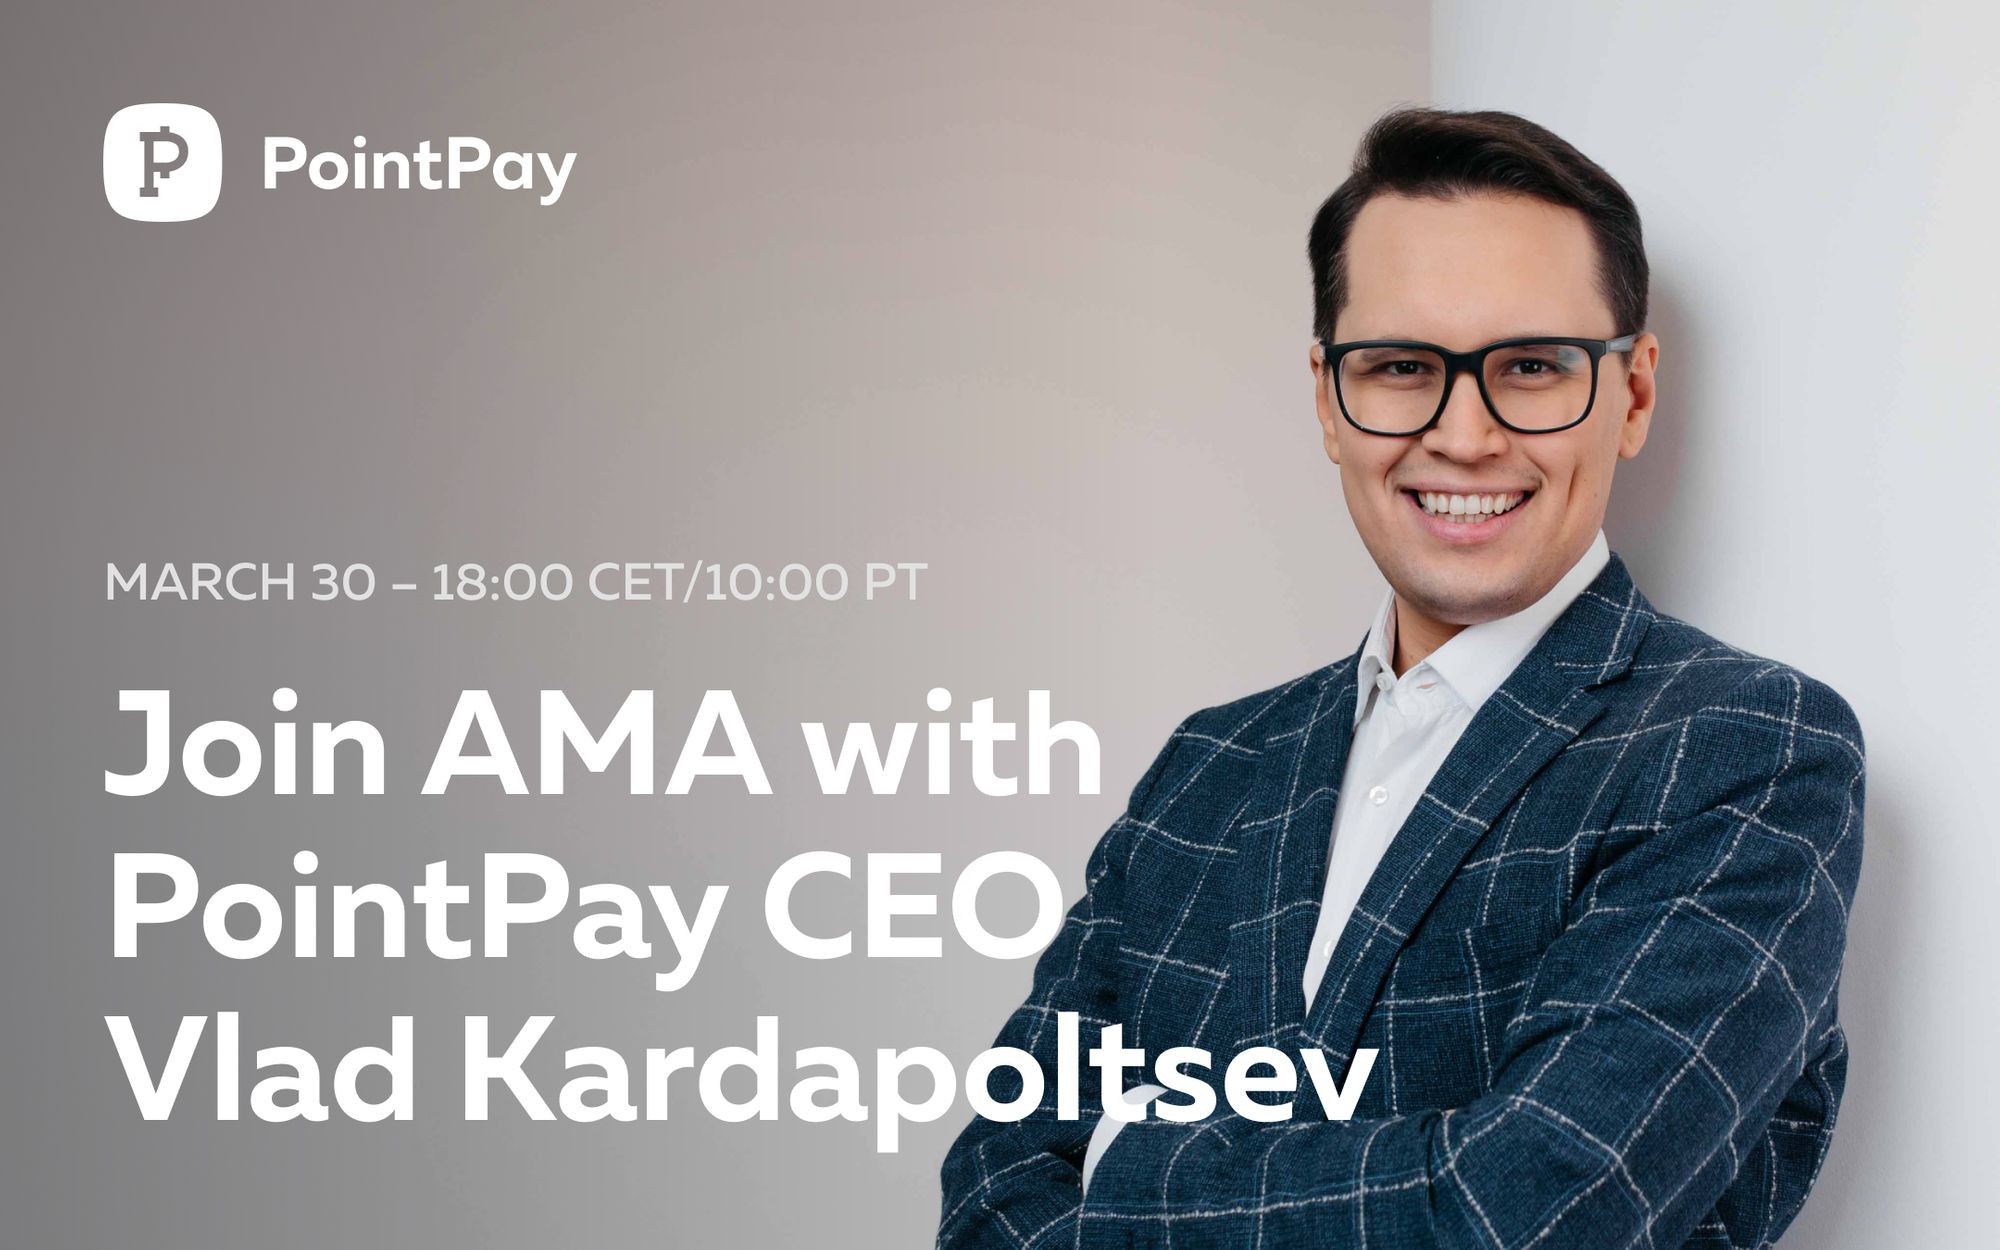 Join AMA with PointPay CEO Vladimir Kardapoltsev on March 30 (18:00 CET time)